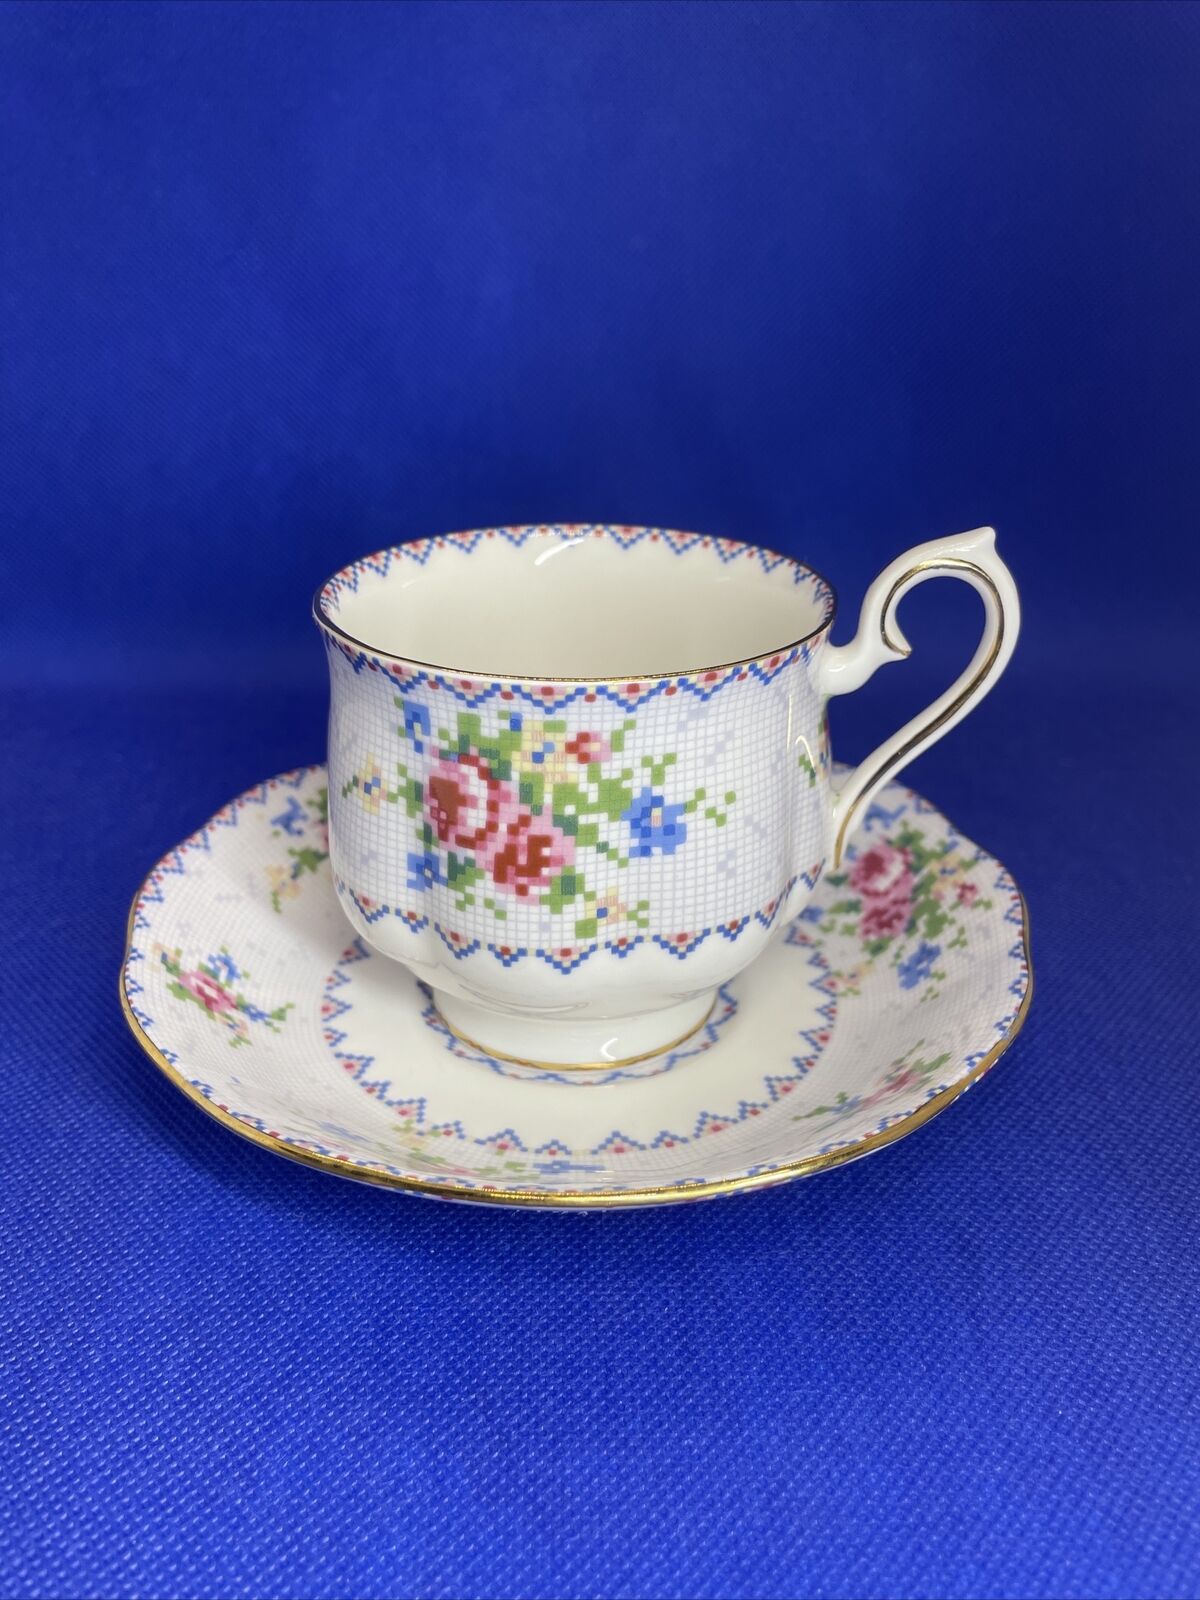 Vintage Royal Albert Petit Point Cup & Saucer Bone China England Dated 1934 Mint